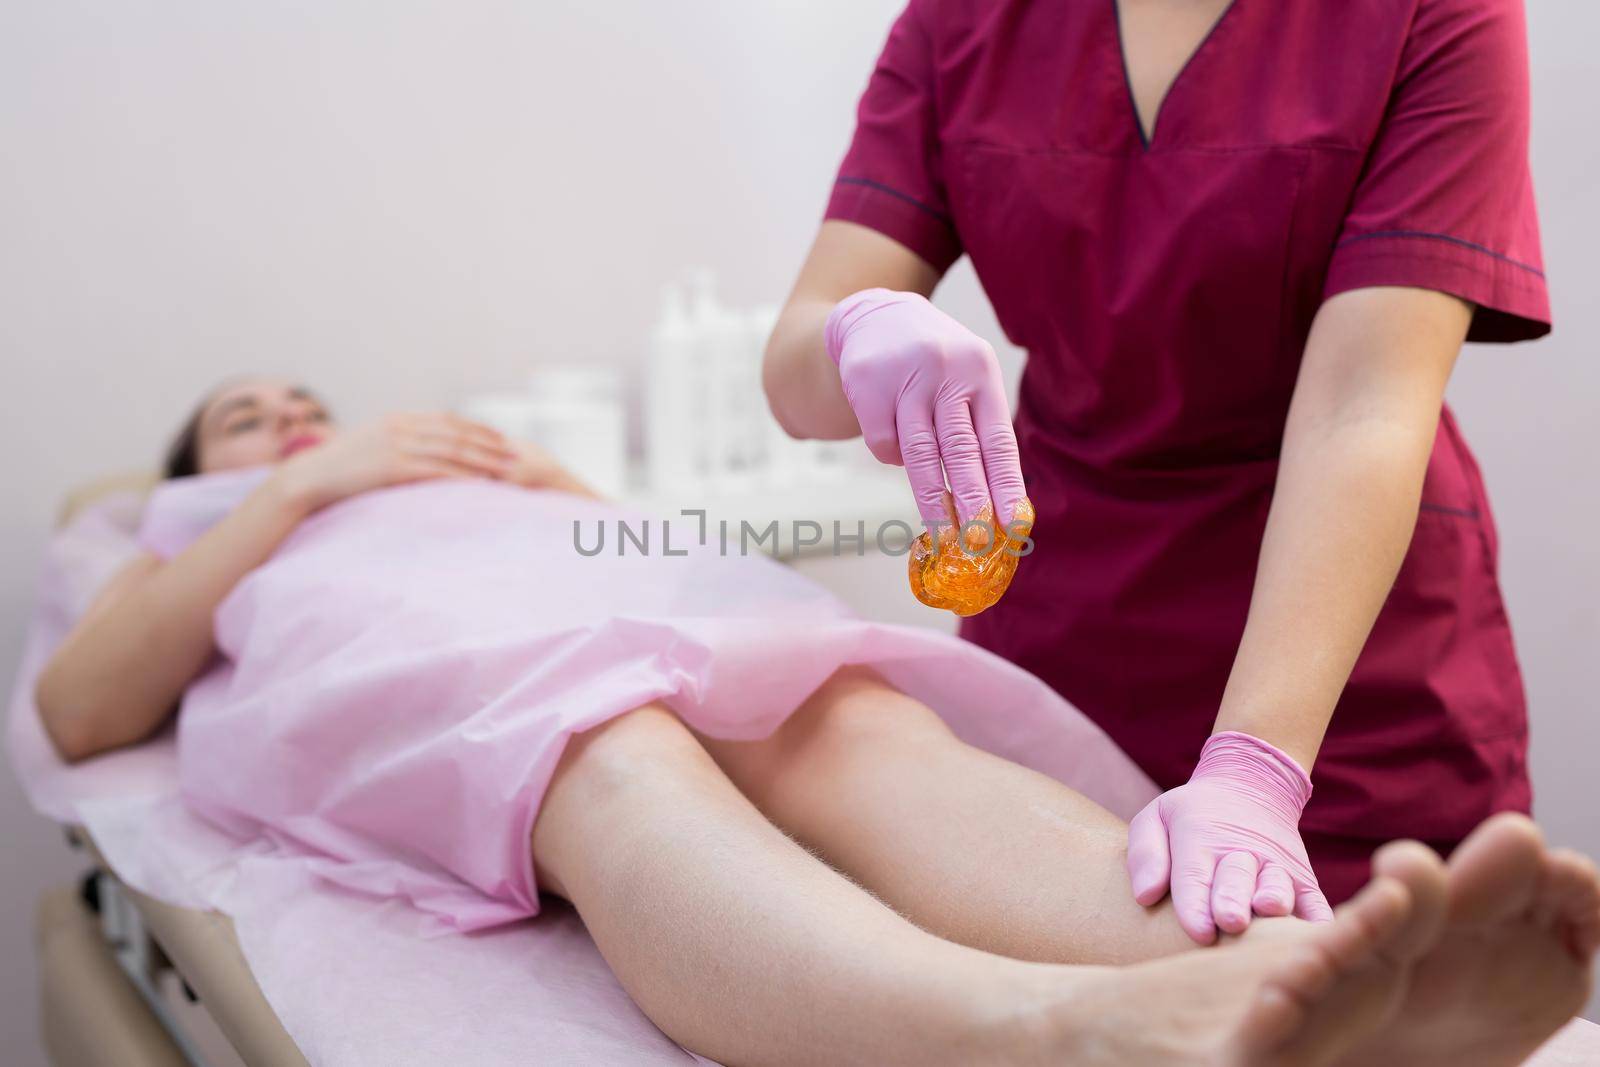 Sugar depilation of the feet in the beauty salon. Rid of hair on the legs. Sugaring. Master shugaring applies thick sugar paste on the legs of a young girl, removing hair on the legs. Close-up by StudioPeace